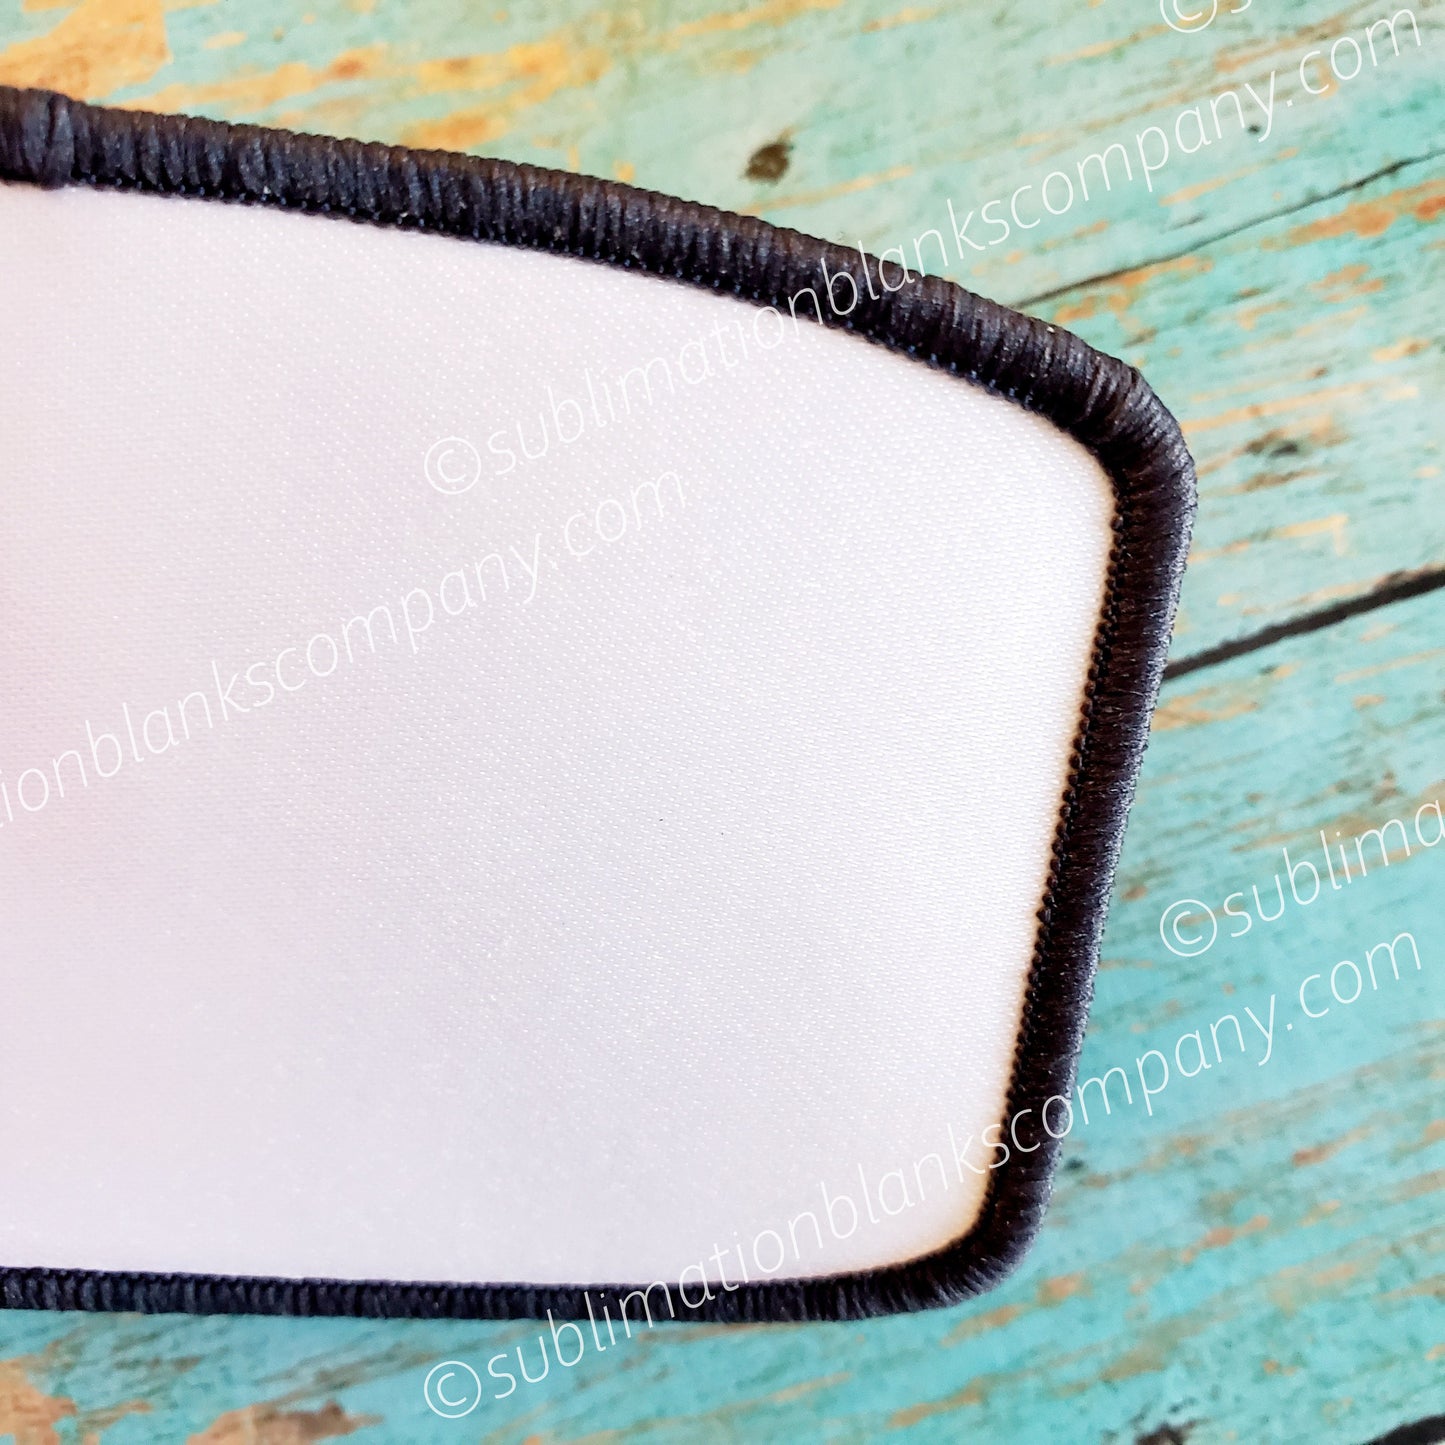 Rounded Rectangle Hat Patch Sublimation Blank with Black Trim